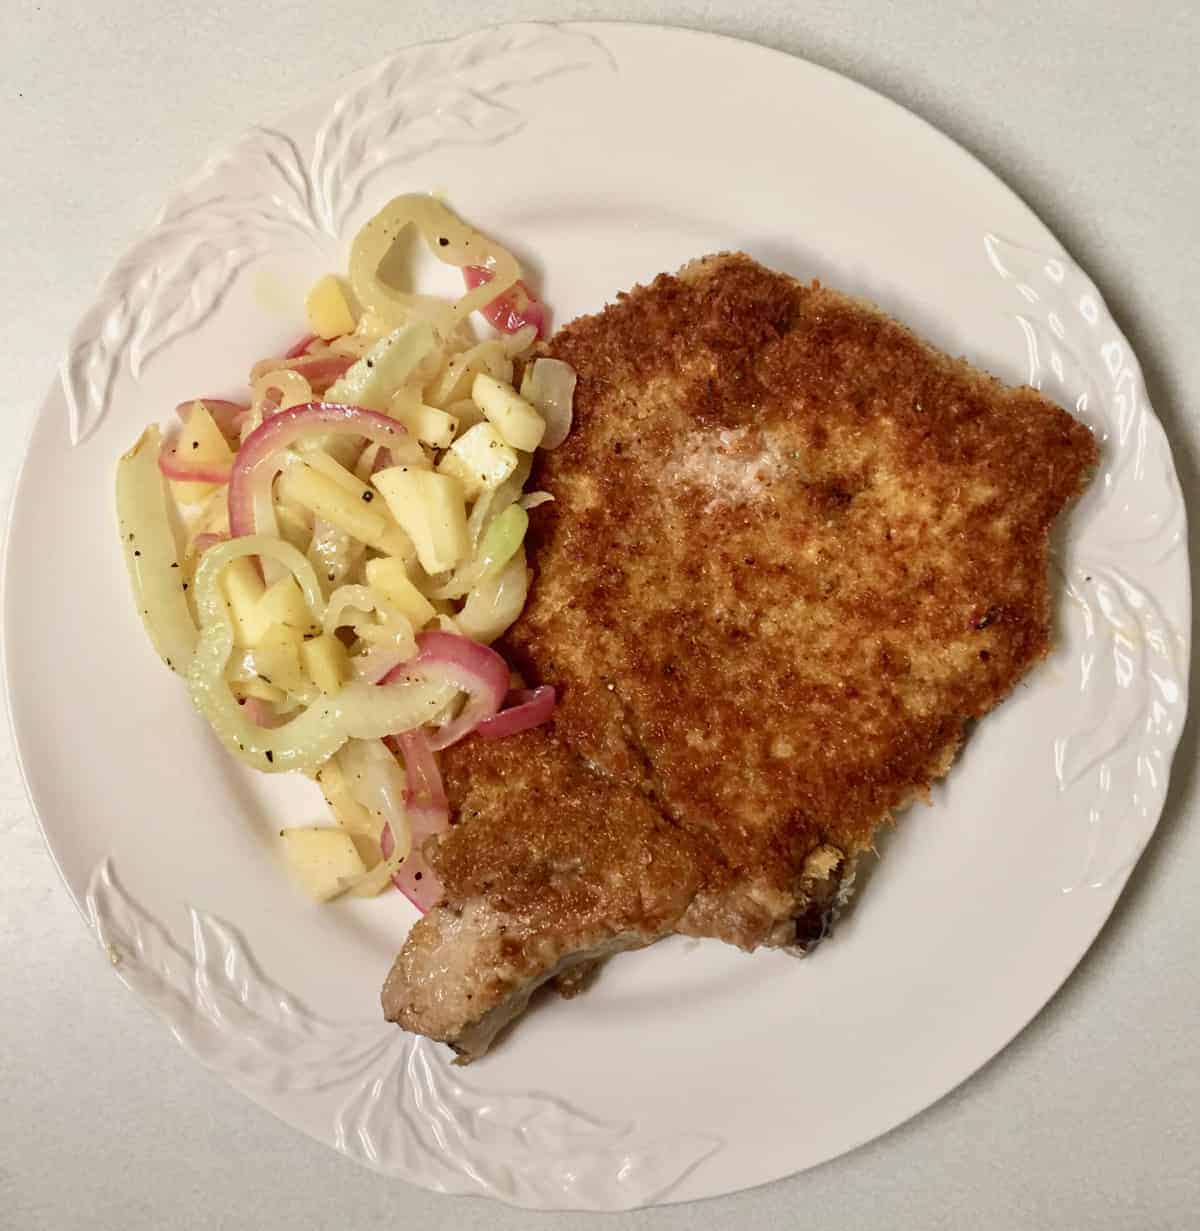 Crispy Pork Chops with Fennel, Red Onion and Apple